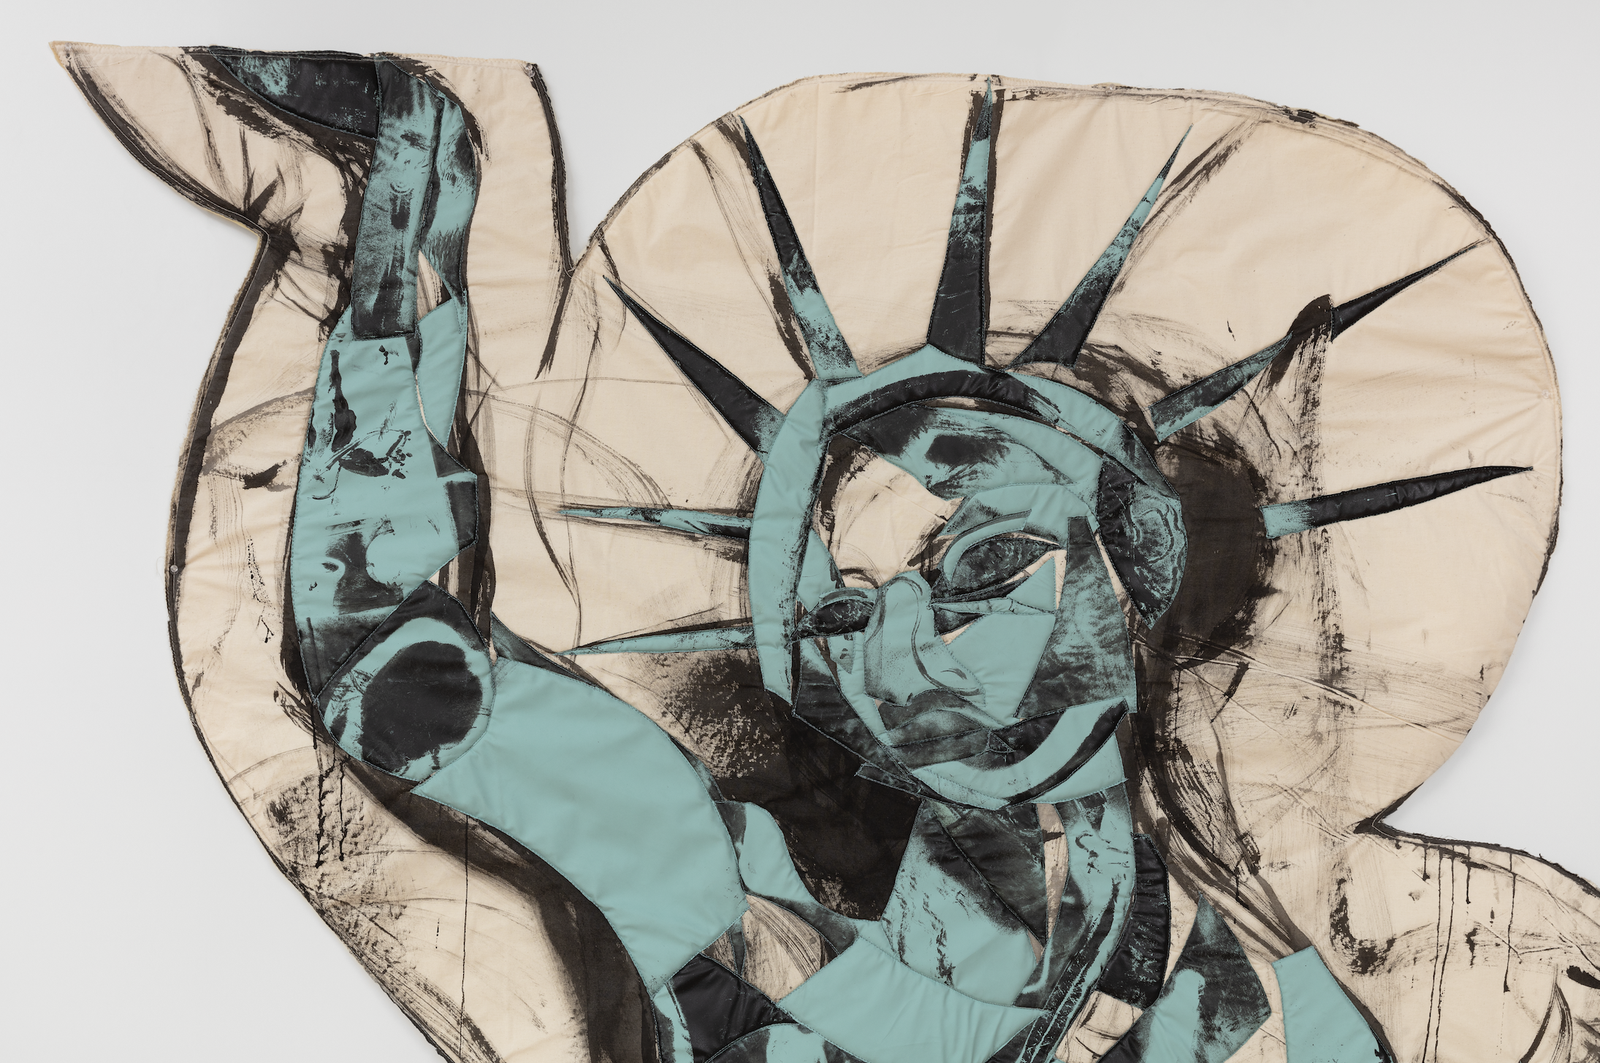 Angela Brandys, Statue of Liberty, detail view, 2021. Printed textile and foam, 237 x 182 cm.Courtesy of the artist and Anaïs Lellouche. Photo: Andrea Rossetti.